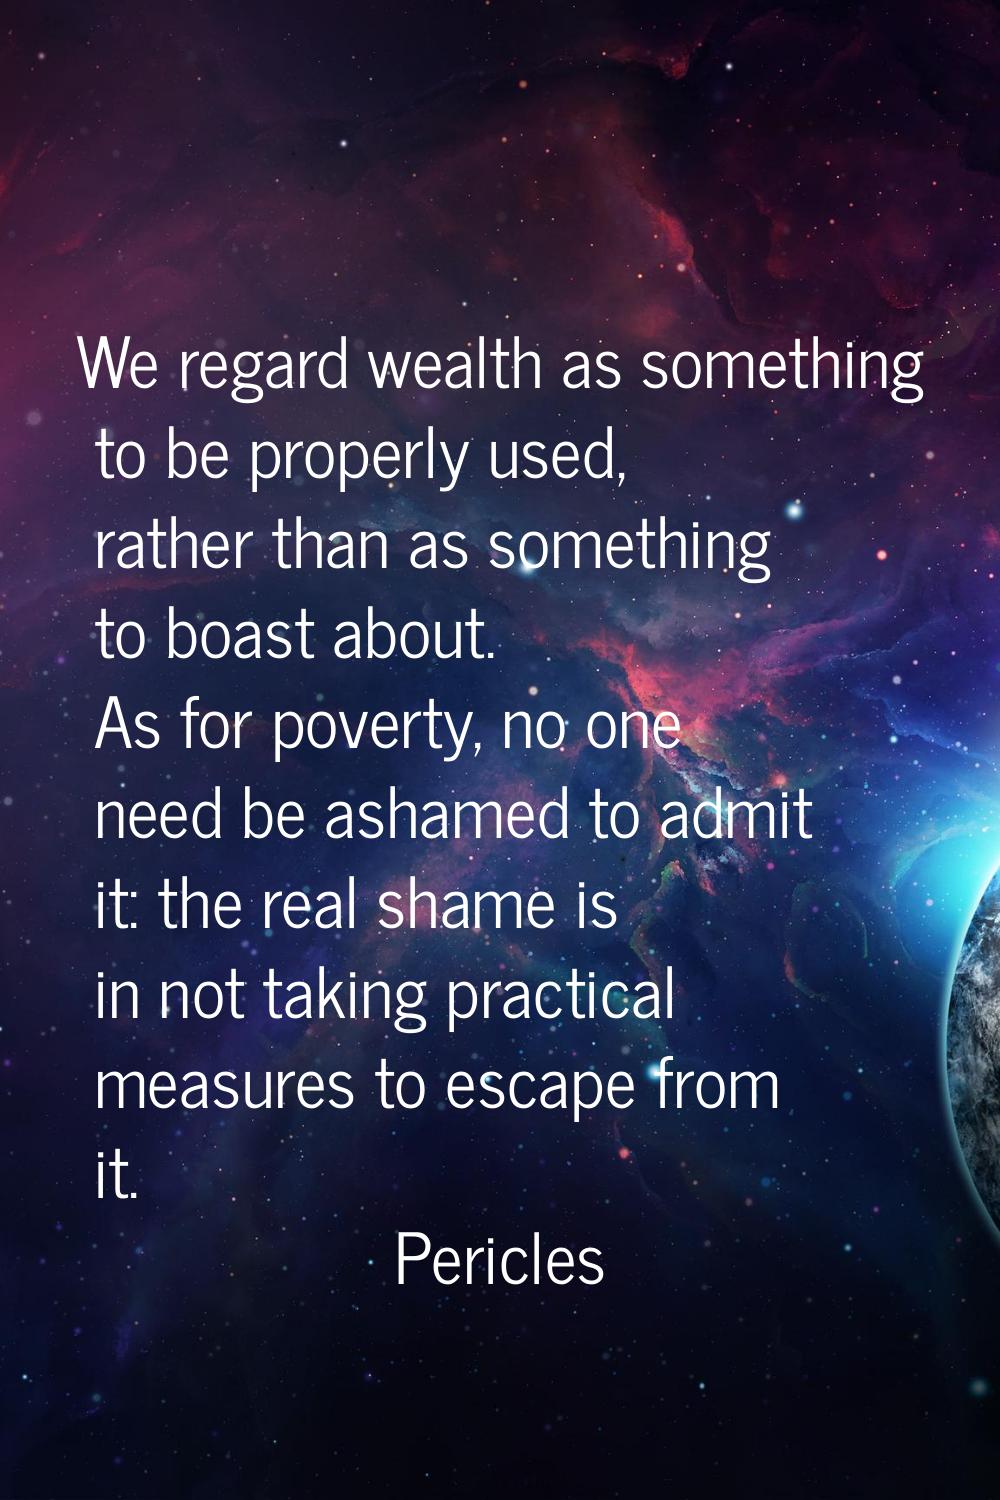 We regard wealth as something to be properly used, rather than as something to boast about. As for 